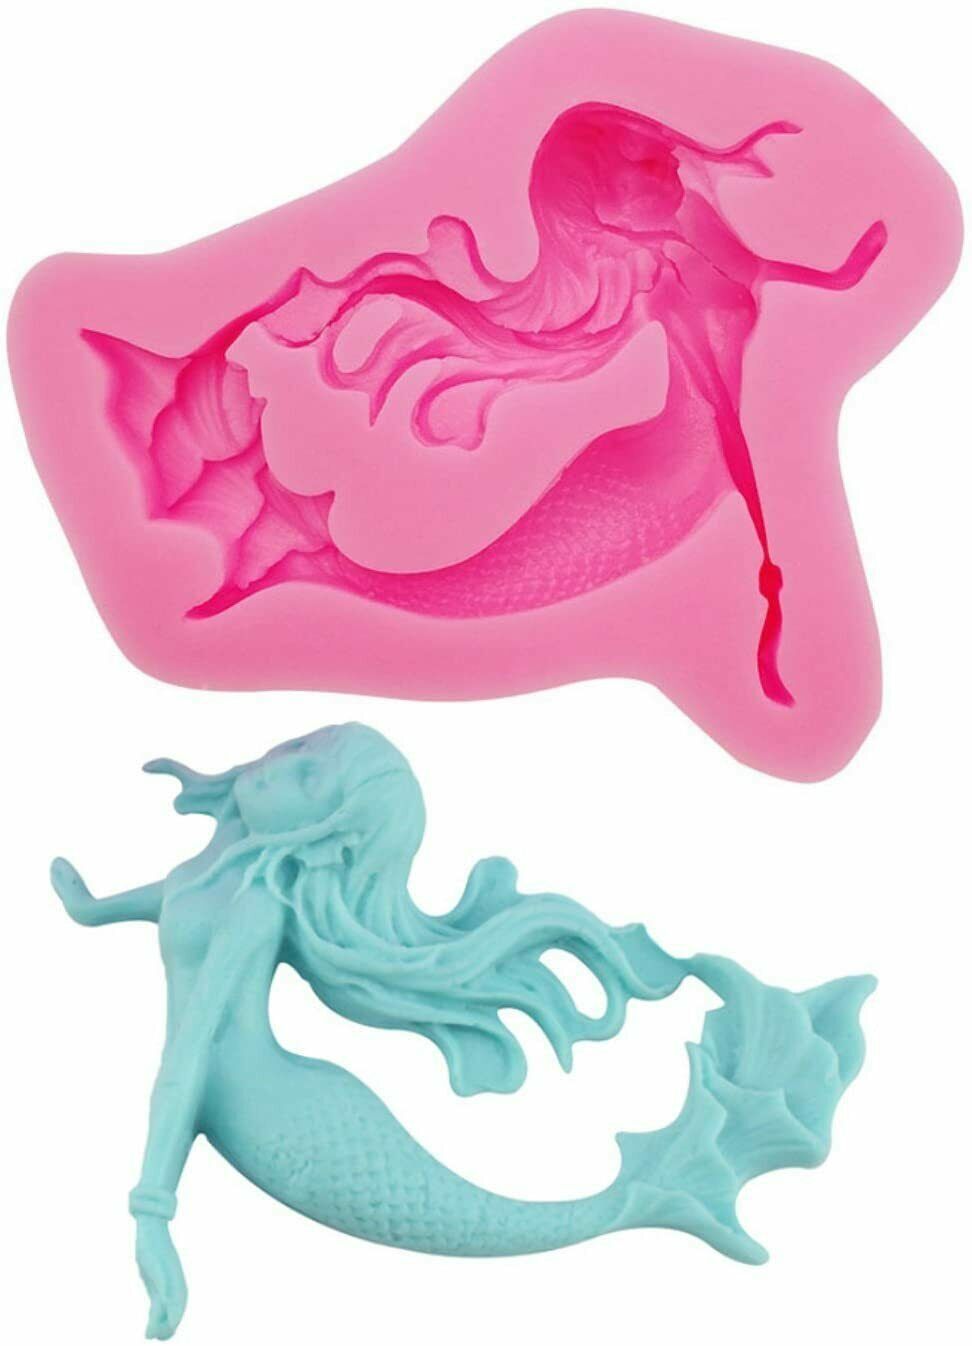 Mermaid Silicone Mould Fairy Cup Cake Icing Baking Decorating Birthday Toppers